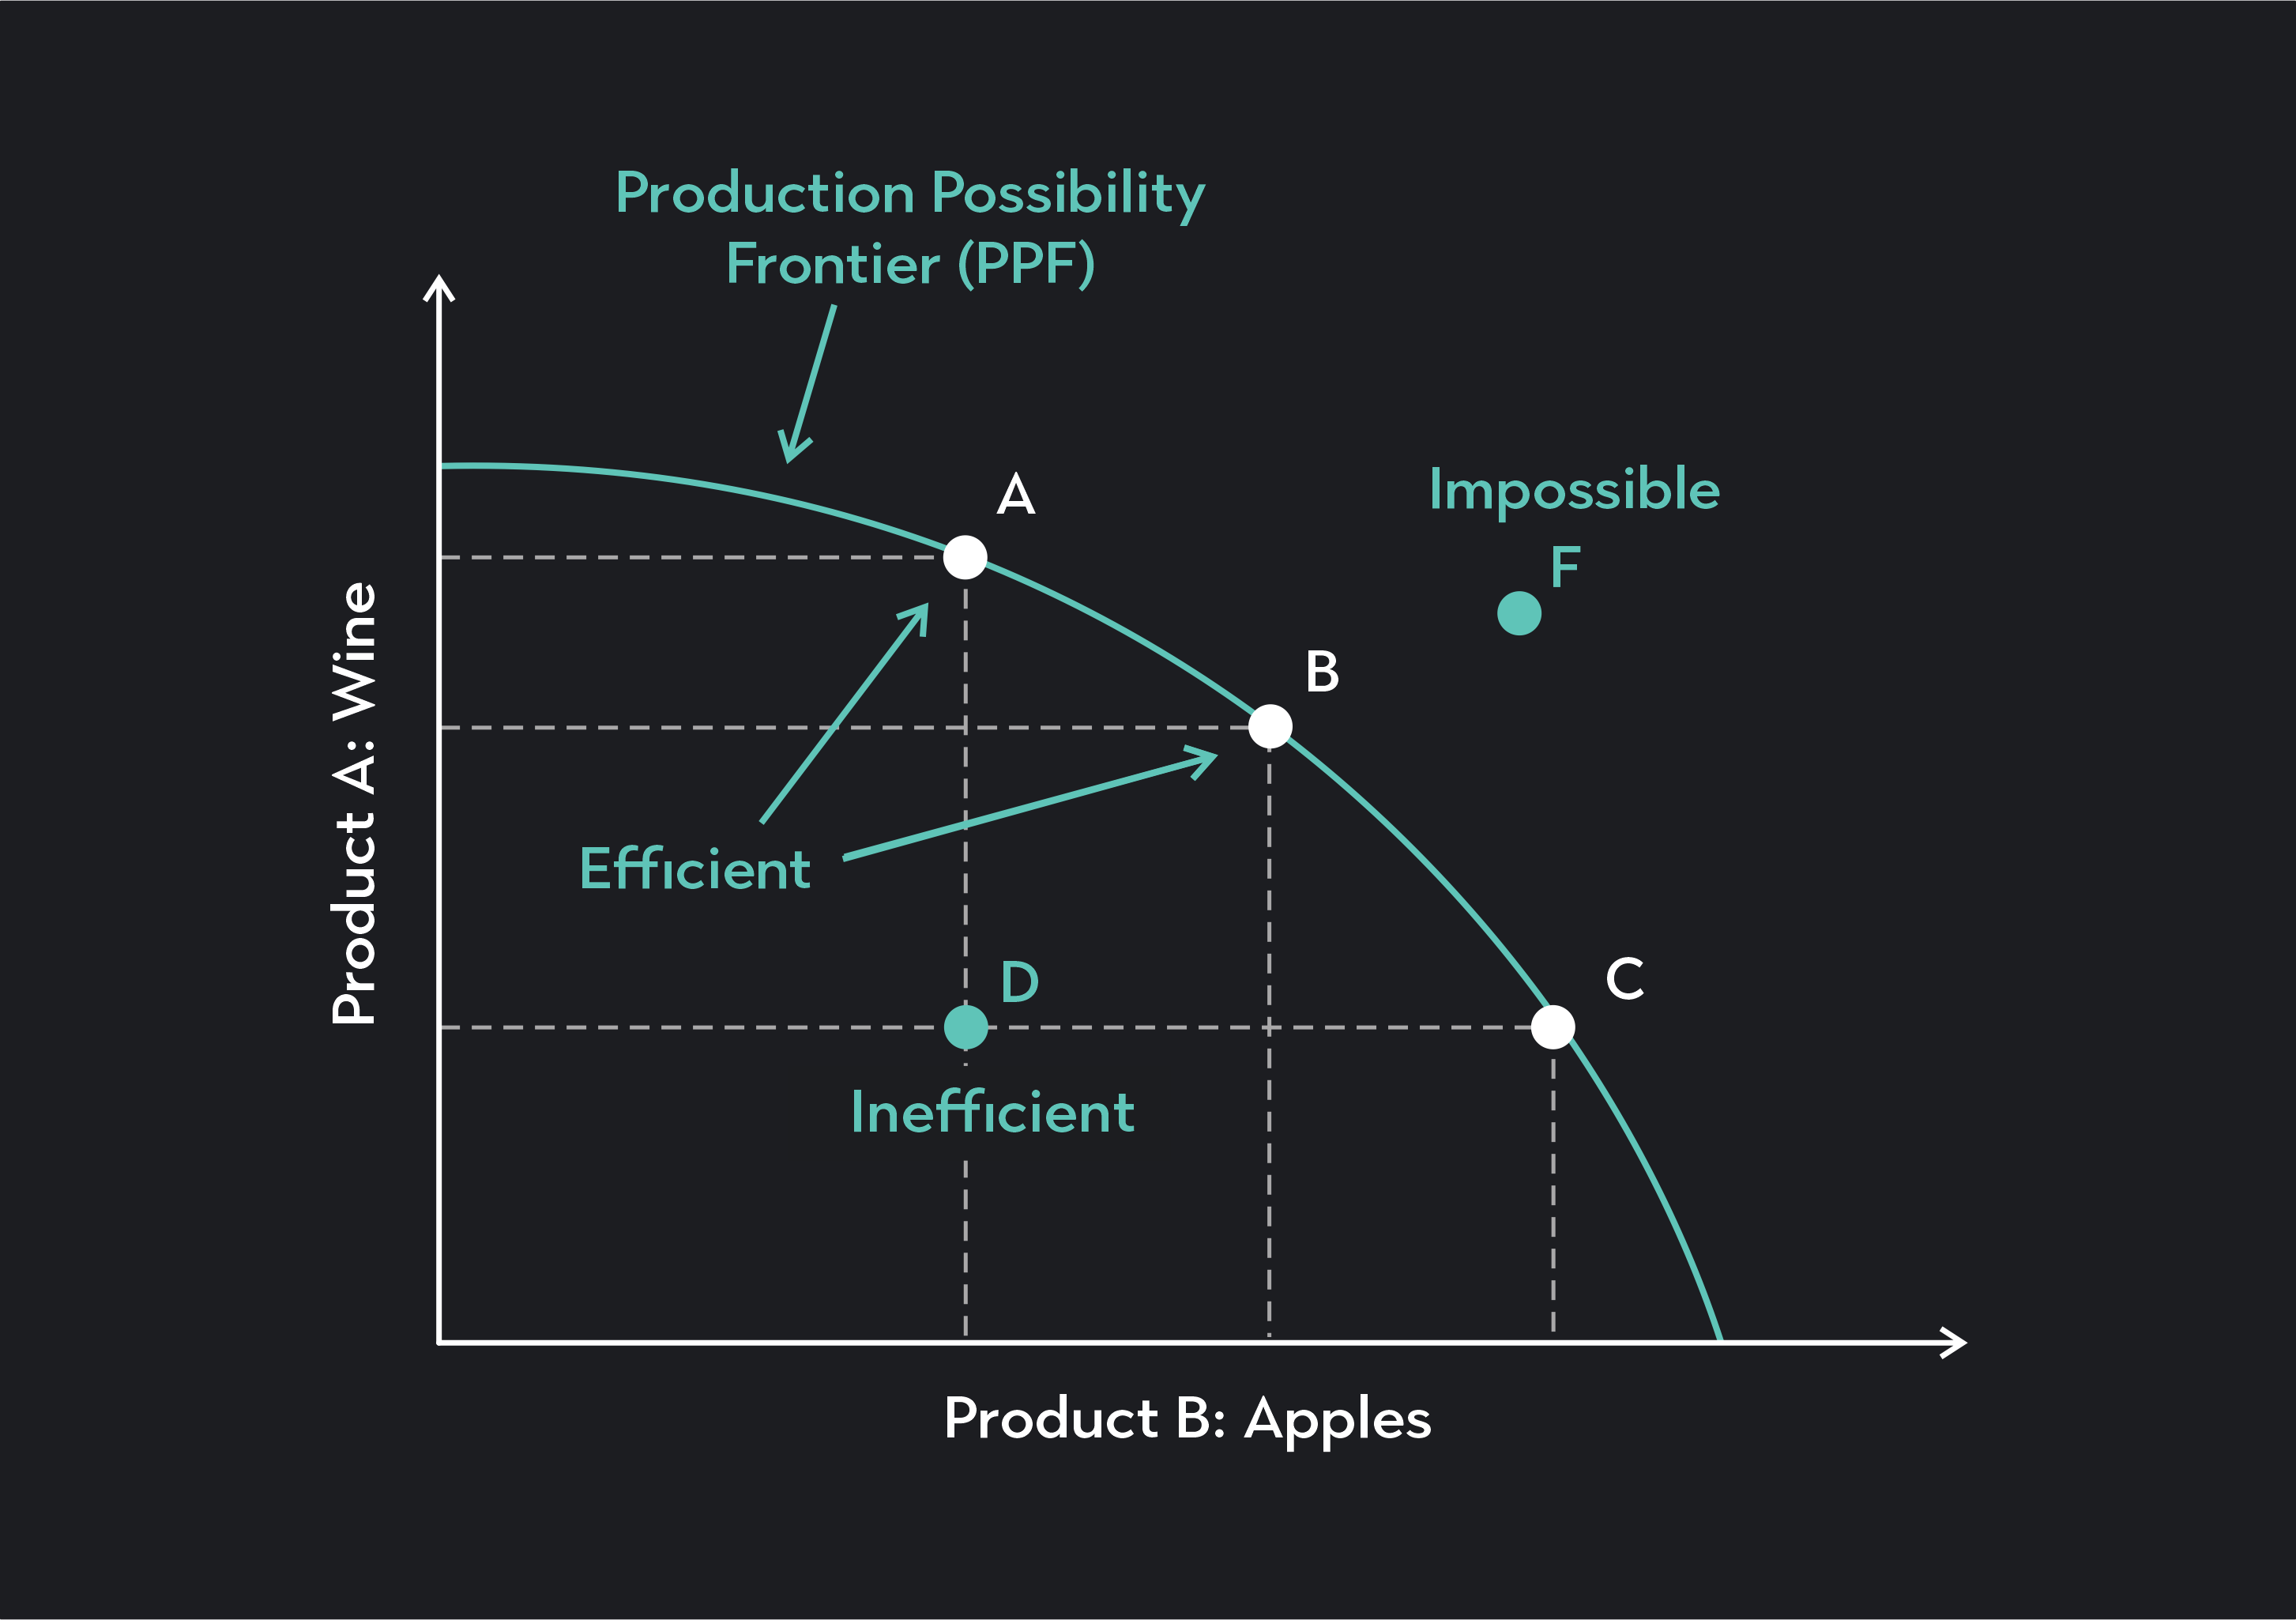 <p>a graph which indicates the different possible choices a firm can make to maximize profit while maintaining maximum efficiency</p><p>Difference between Price 1 and Price 2 is not the same as the difference between Price 2 and Price 3 (oppurtunity cost)</p><p>curve is named PPF (Production Possibility Frontier)</p>